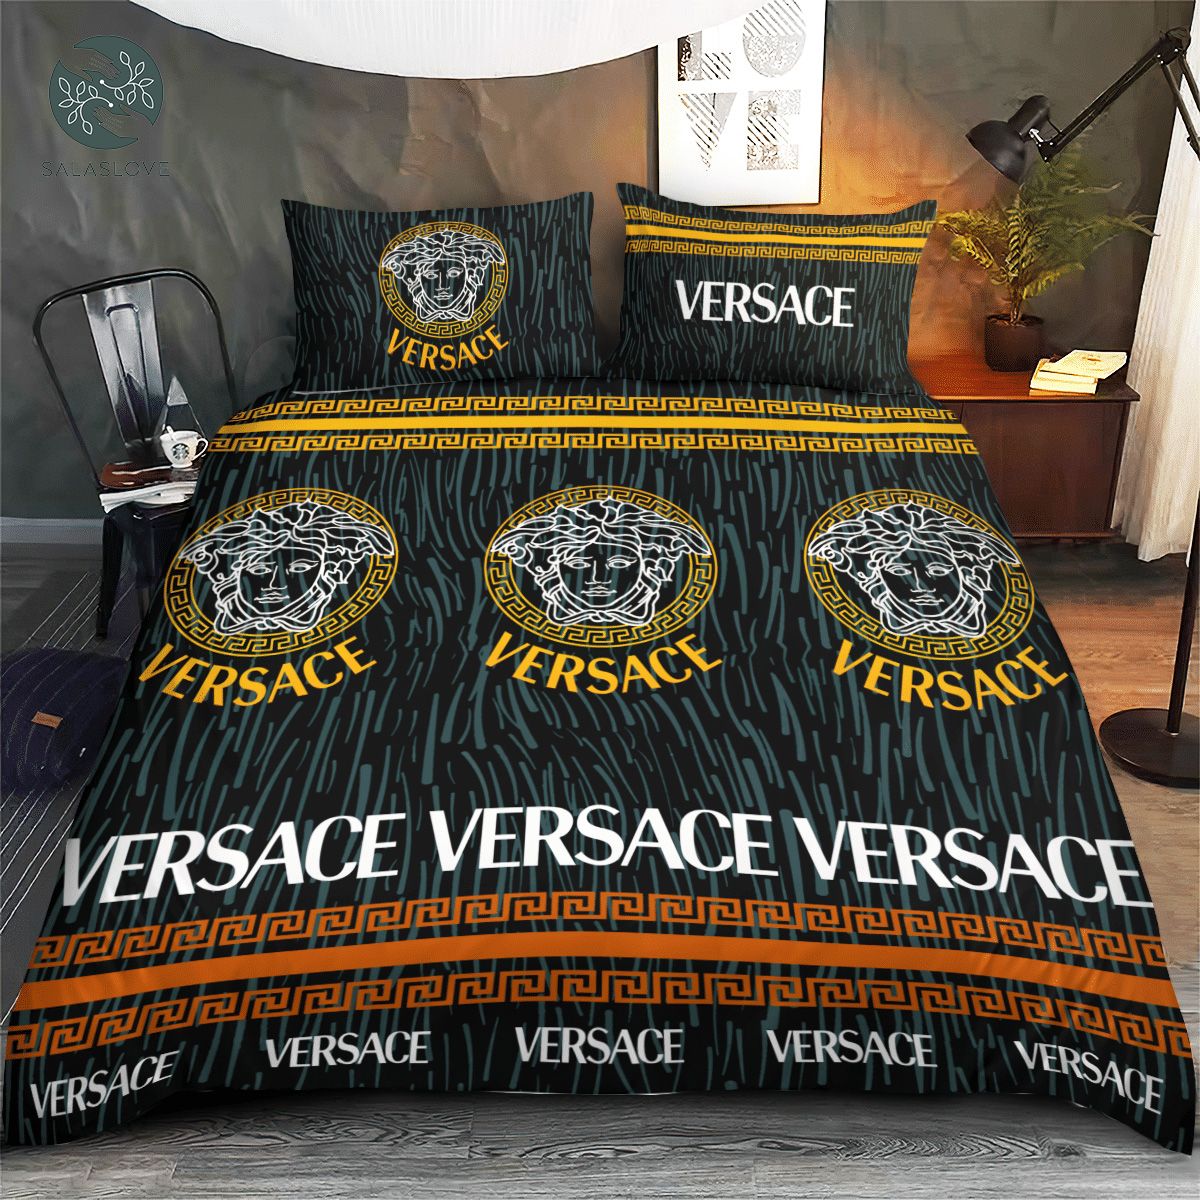 Versace Limited Edition Luxury Bedding Sets